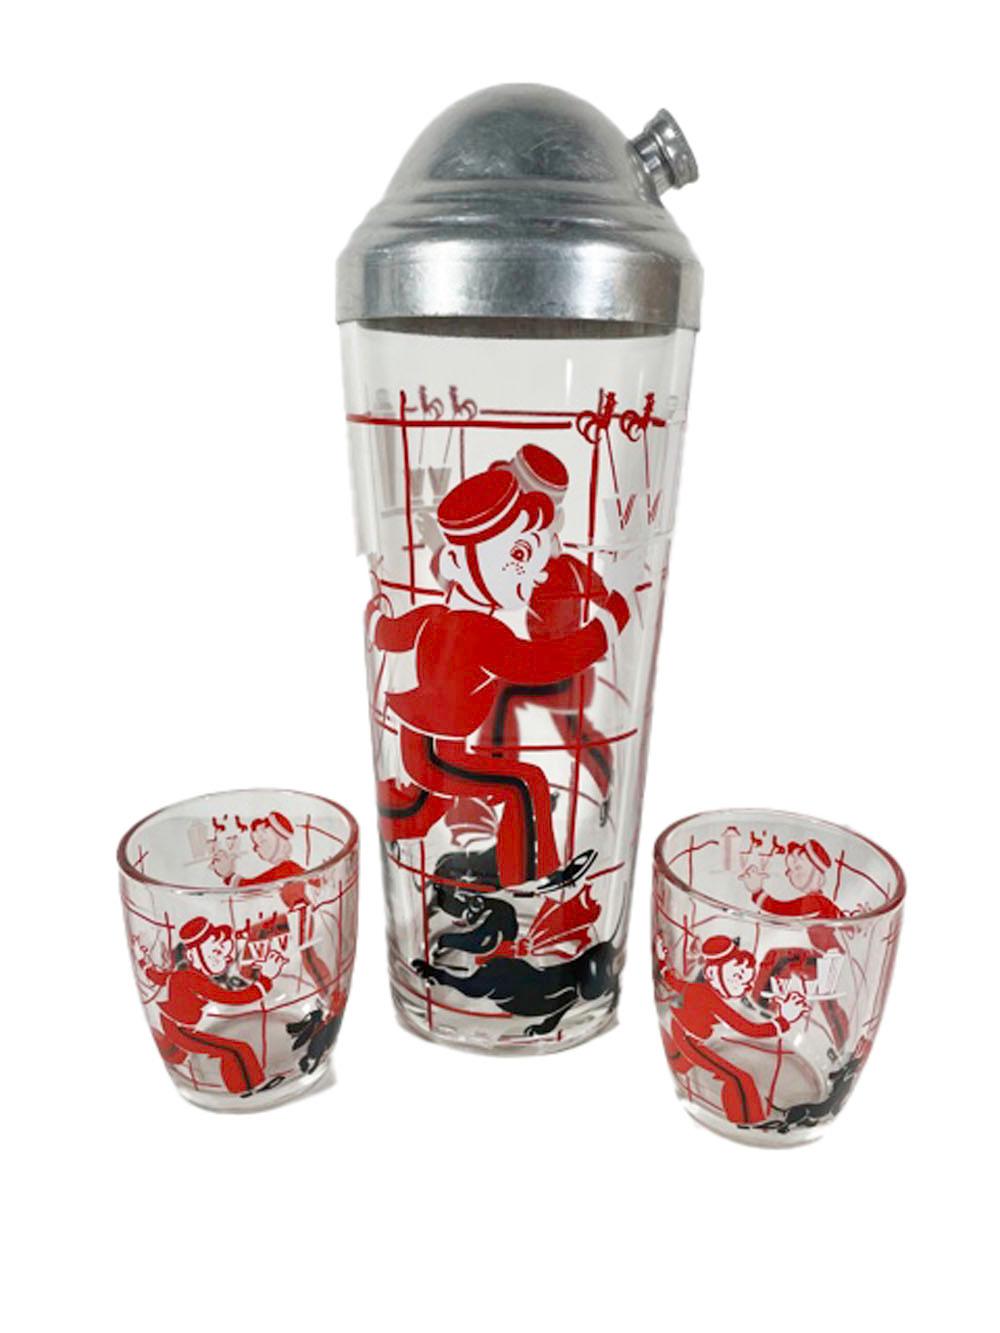 20th Century Art Deco Cocktail Shaker Set, Bellhop Walking a Dachshund and Carrying Cocktails